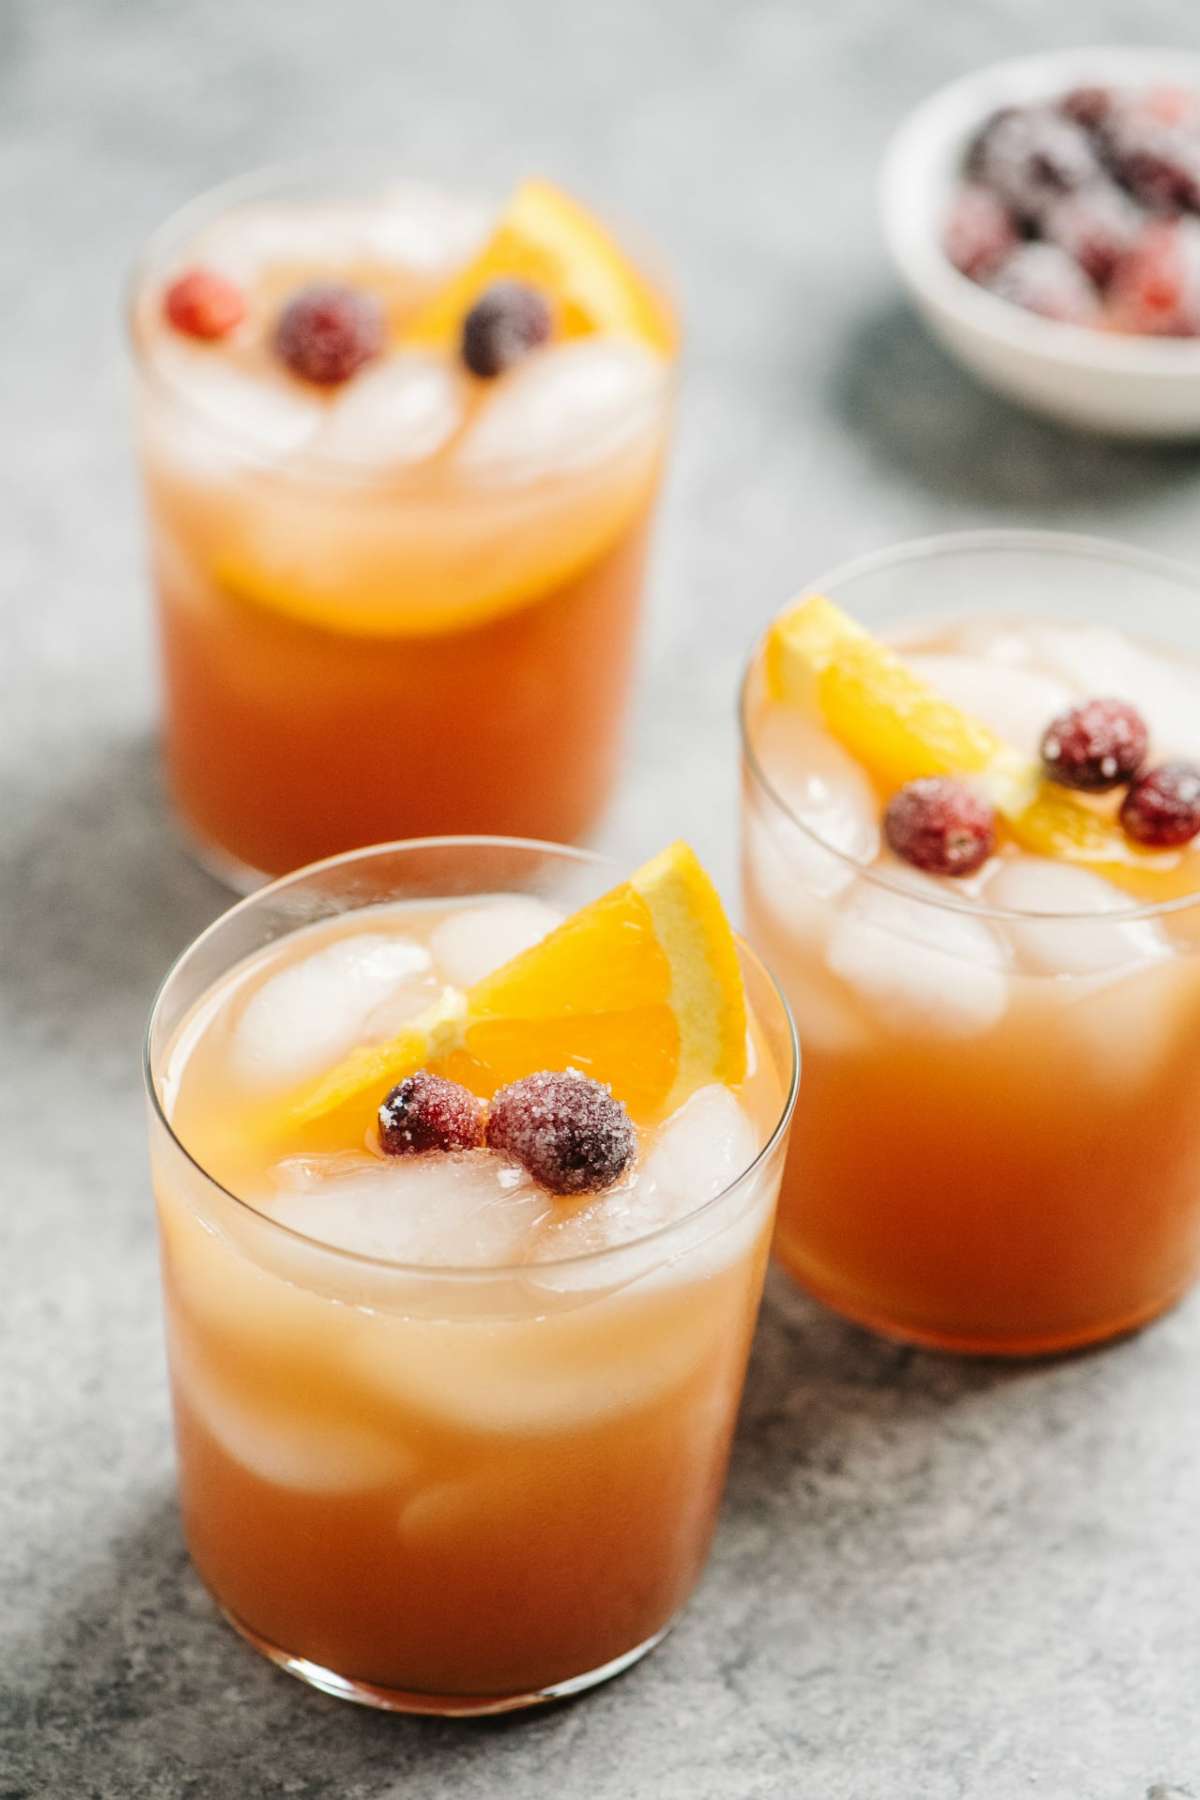 Cranberry cocktail garnished with cranberries and orange slices.